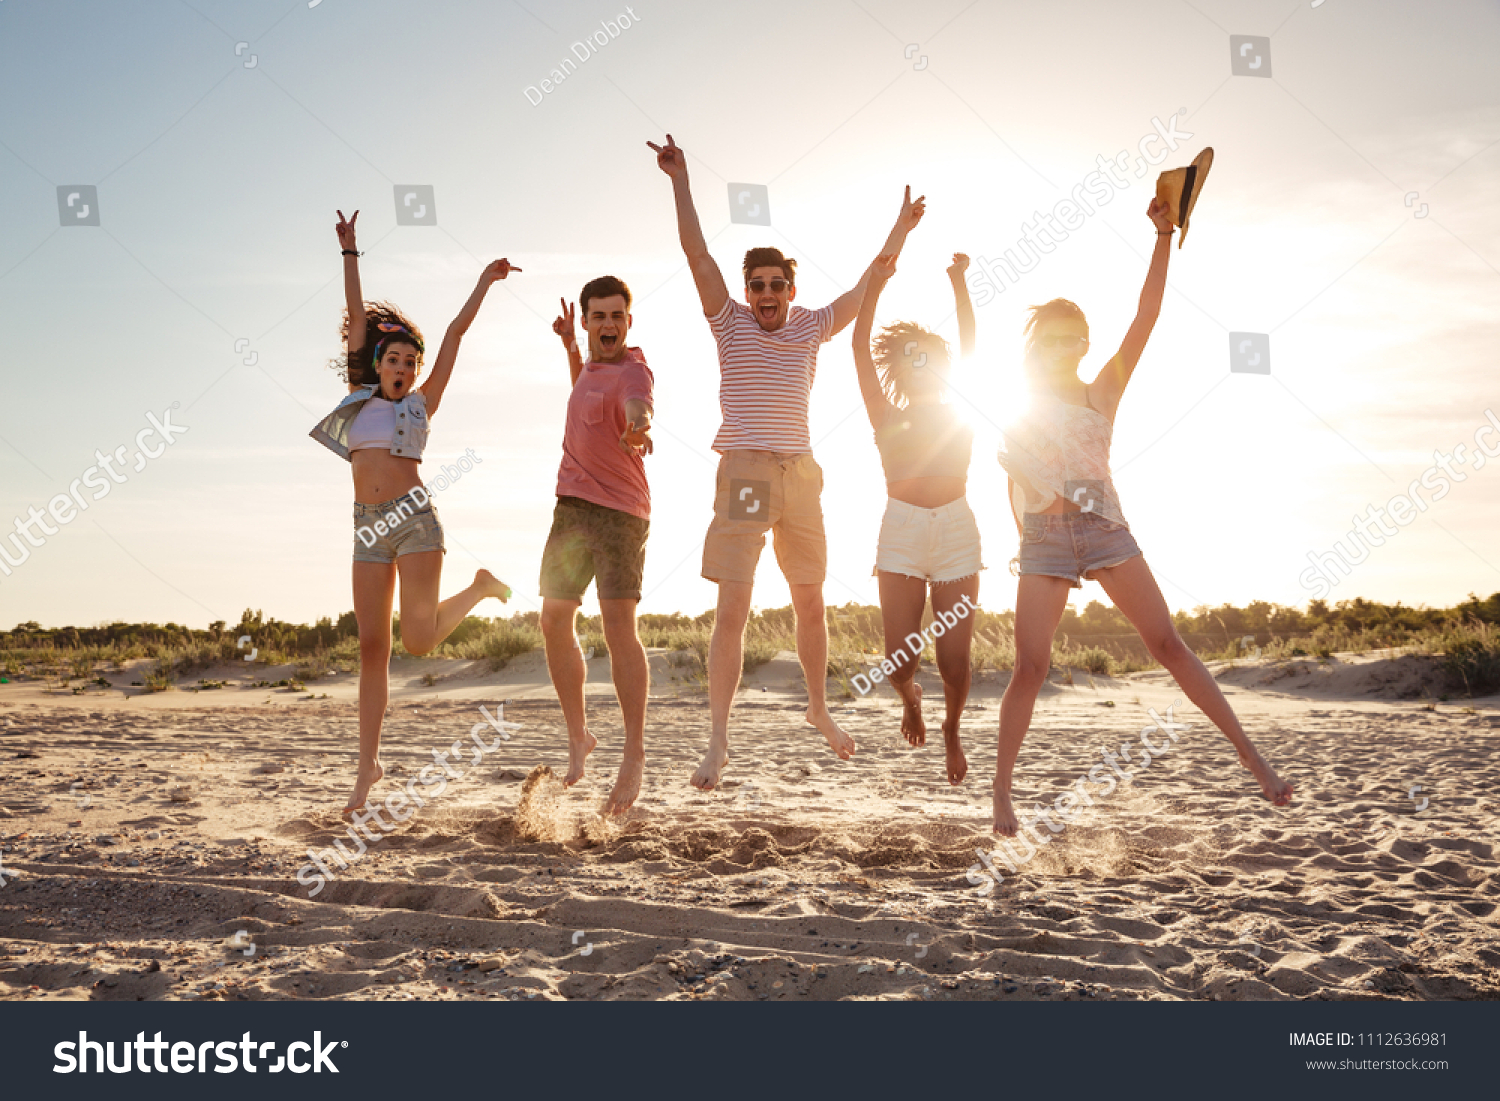 Group of cheerful young friends dressed in summer clothes jumping together with hands raised at he beach #1112636981